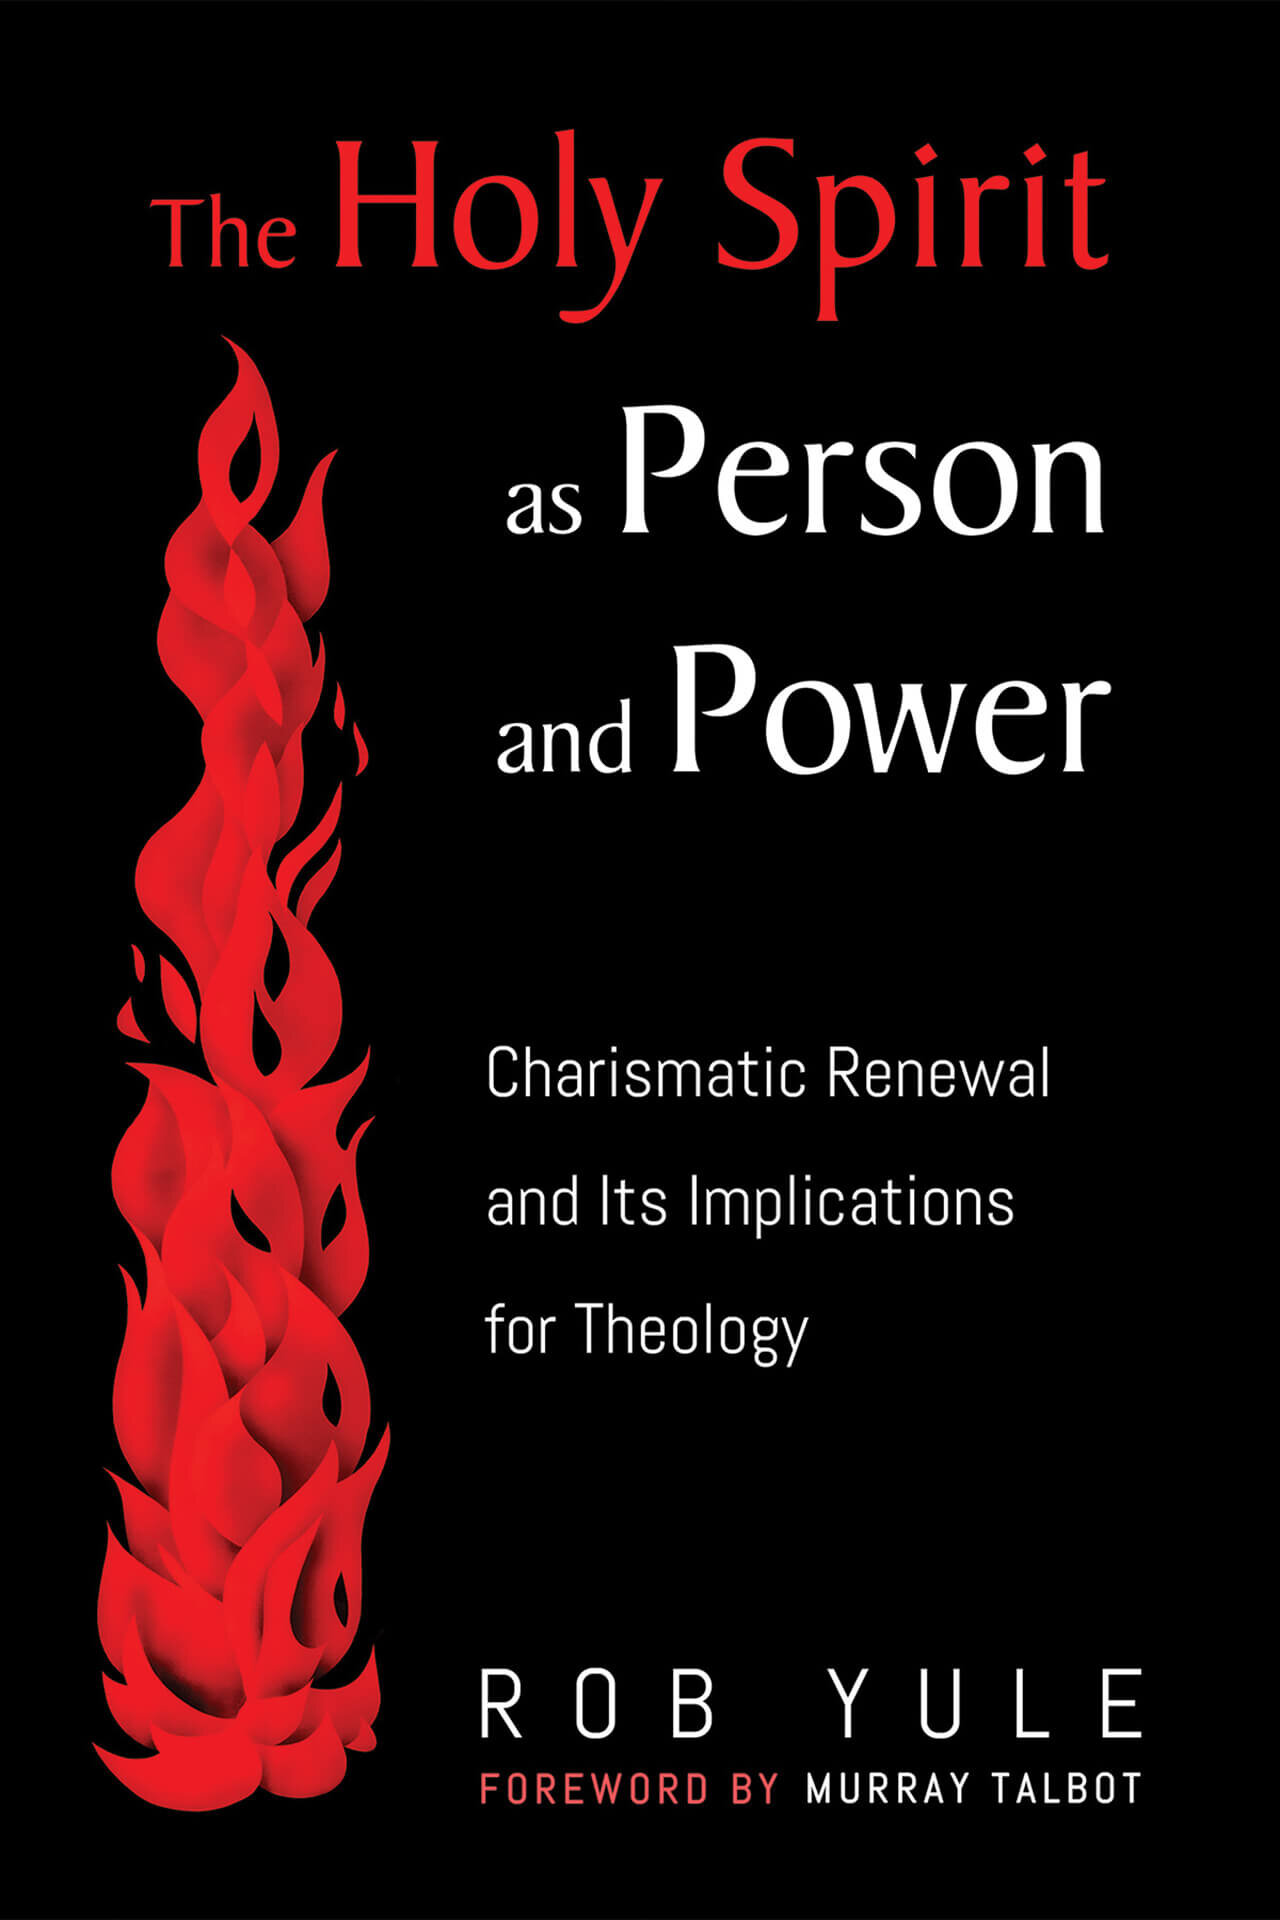 Holy-Spirit-as-Person-and-Power-front-cover-Rob-Yule-Wild-Side-Publishing-Wipf-and-Stock-NZ-Christian-books.jpg